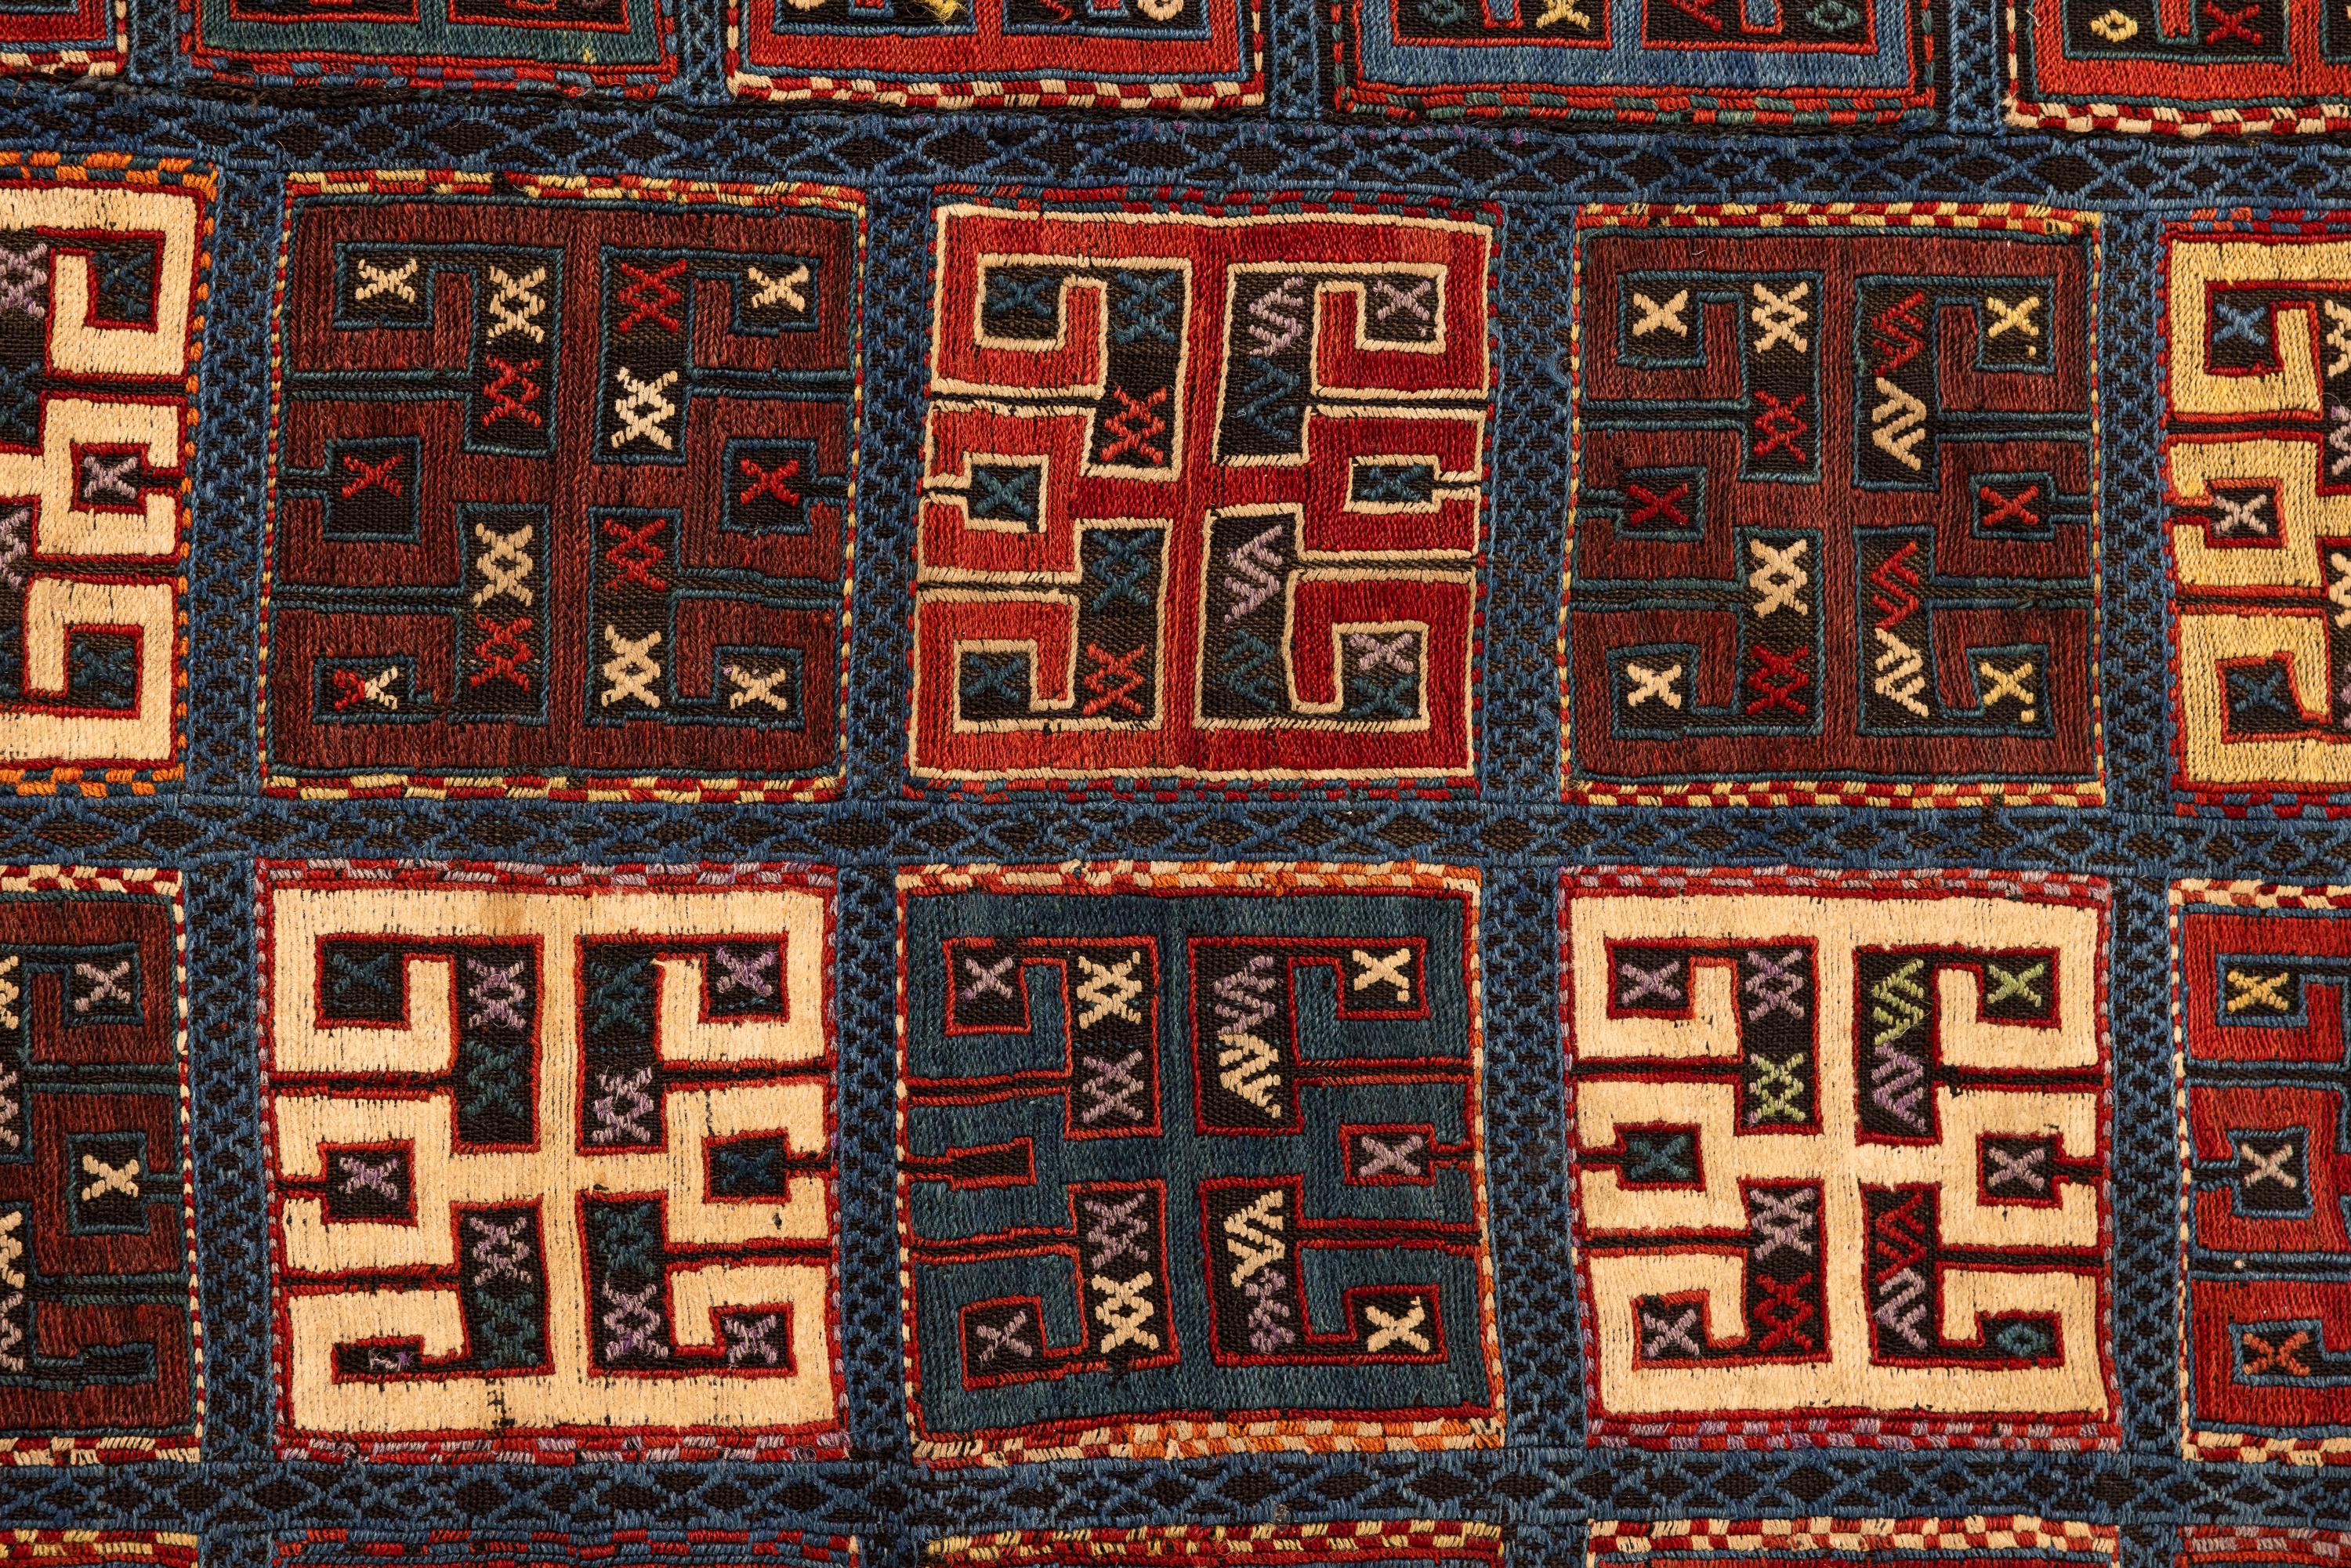 Verneh – Karabagh, South Caucasus
This high-quality Azerbaijani Verneh was woven using Soumak and brocade techniques on a dark-coloured base. With colourful geometric motifs, each of the 80 square compartments contains a large cruciform design with